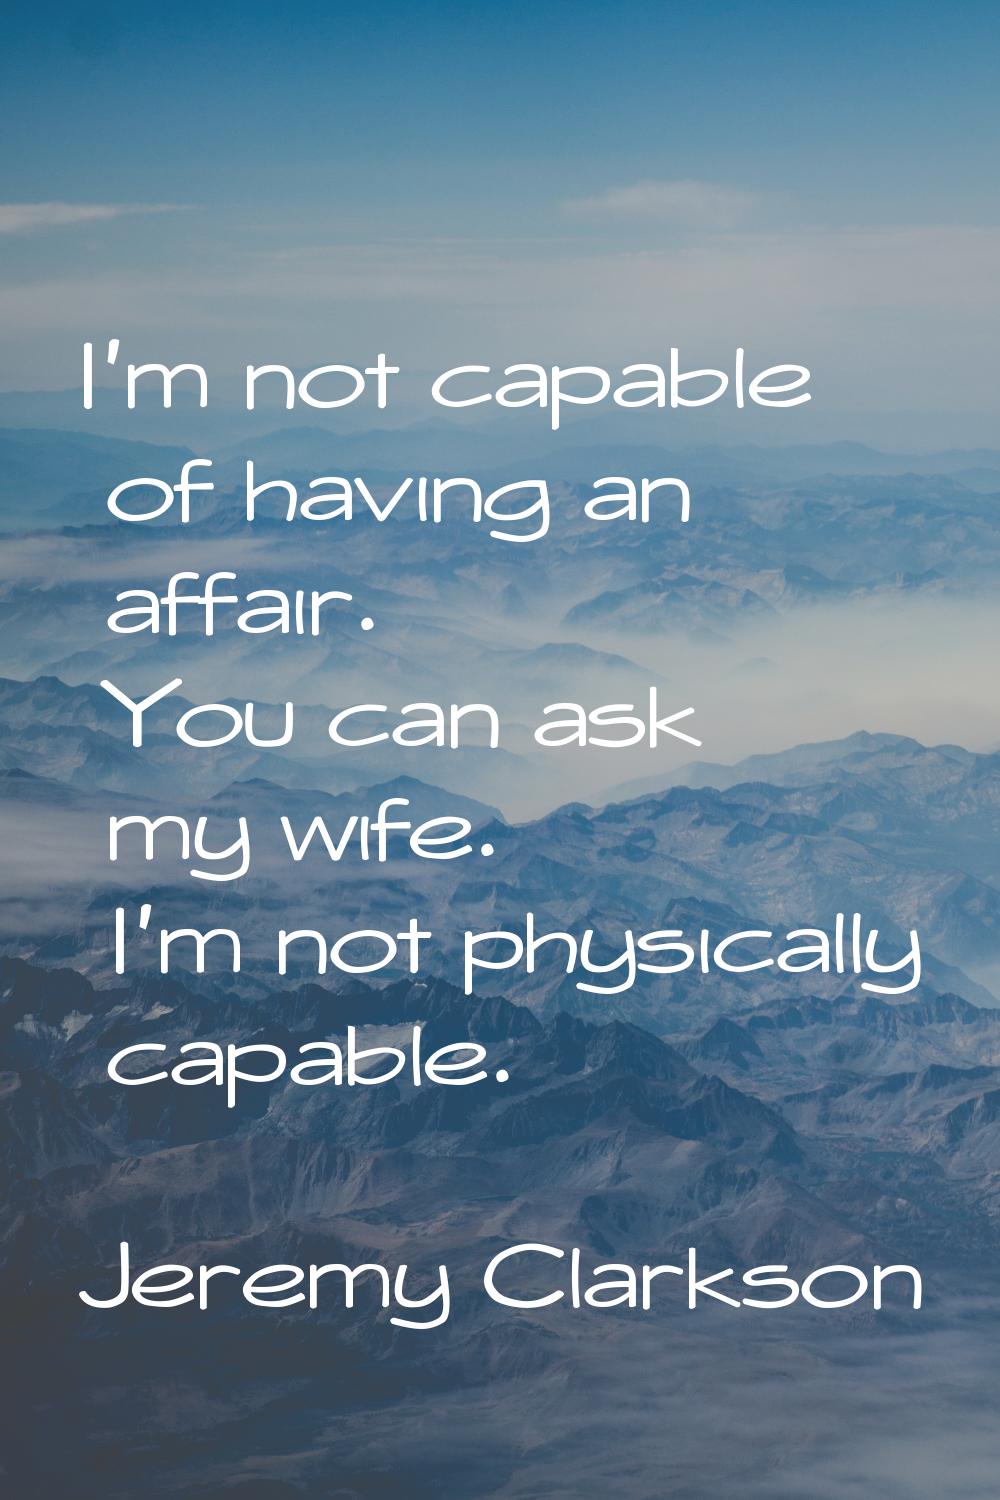 I'm not capable of having an affair. You can ask my wife. I'm not physically capable.